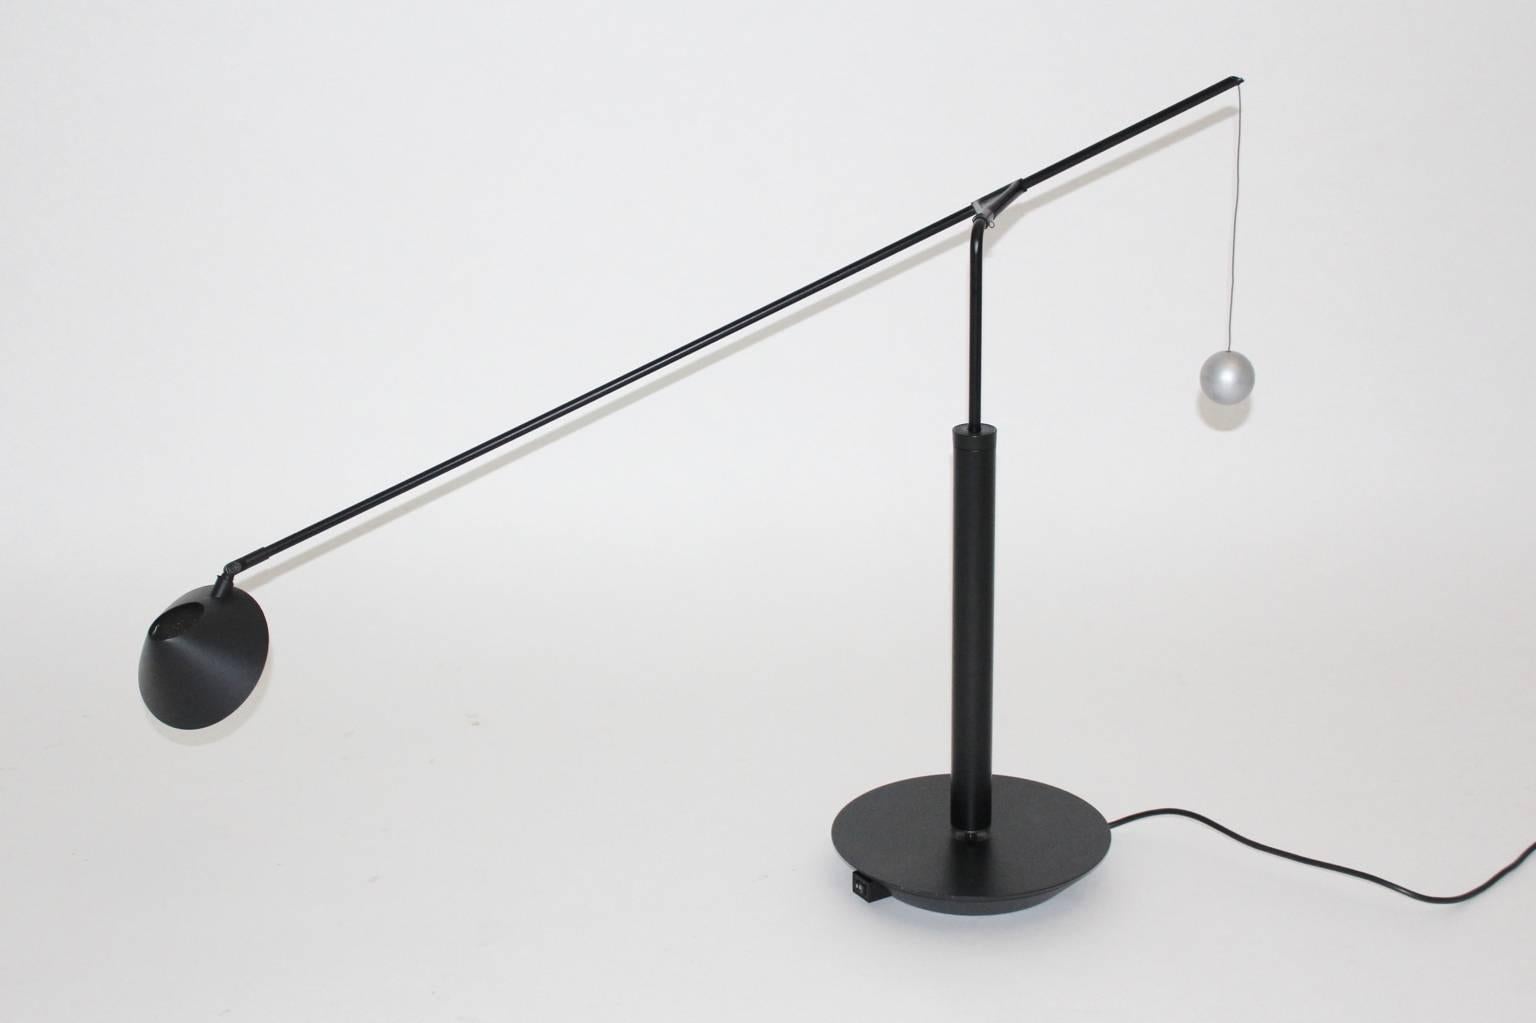 This table lamp was designed by Carlo Forcolini 1989 and executed by Artemide Italy.

The table lamp was made of metal black lacquered and plastic. The metal ball, which features the counterbalance was grey lacquered.
Important to mentioned is, that